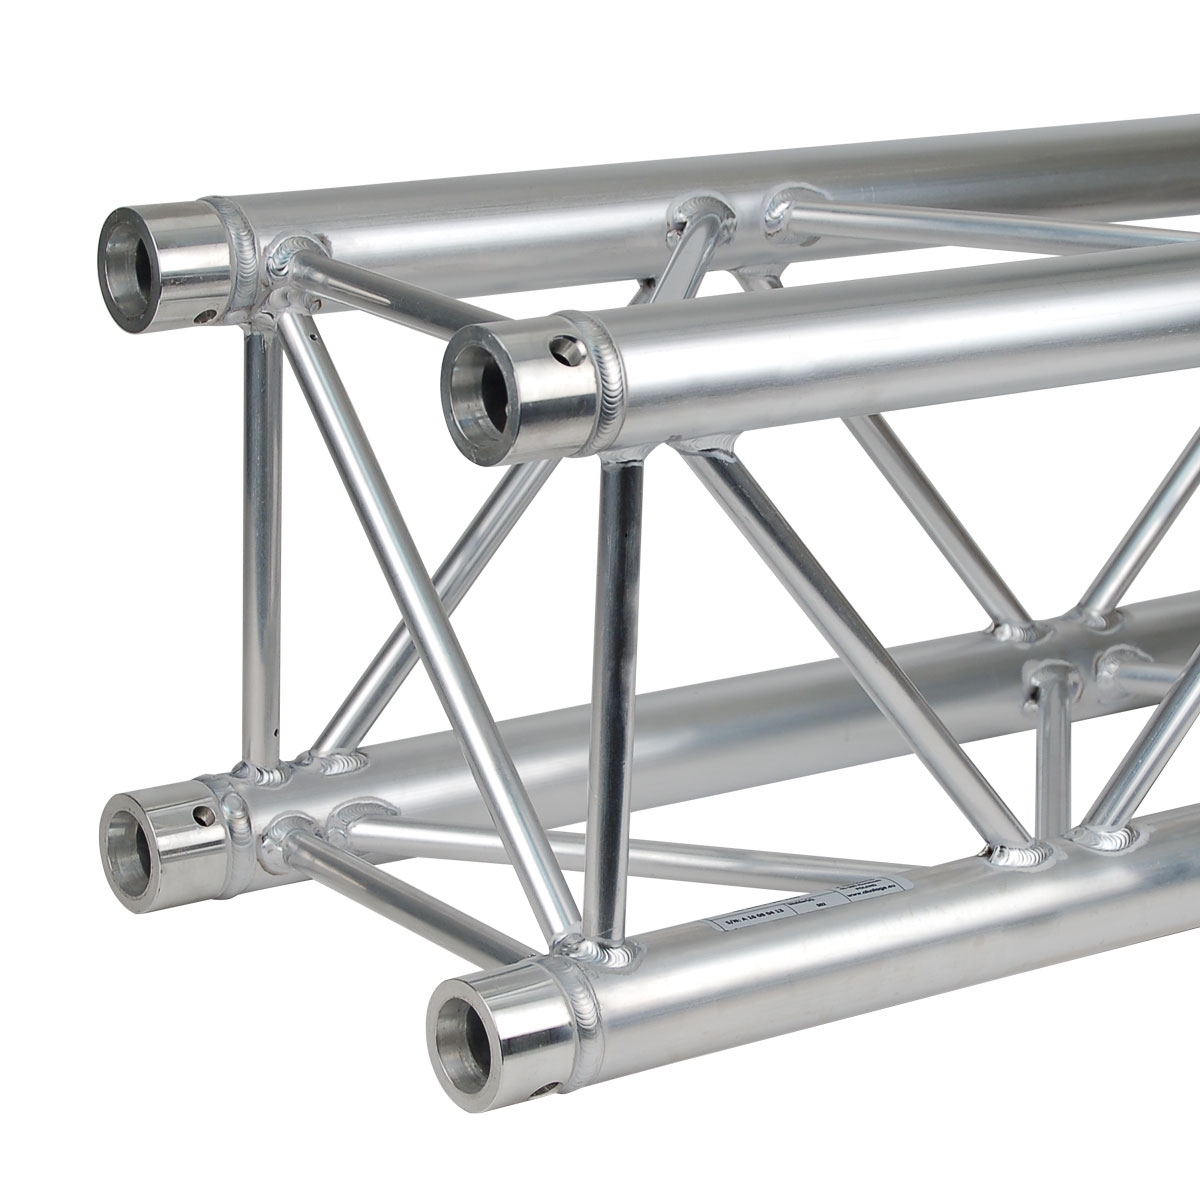 Square aluminium truss - Heavy duty - 290mm - Length 50cm - <strong>Connection kit included</strong>